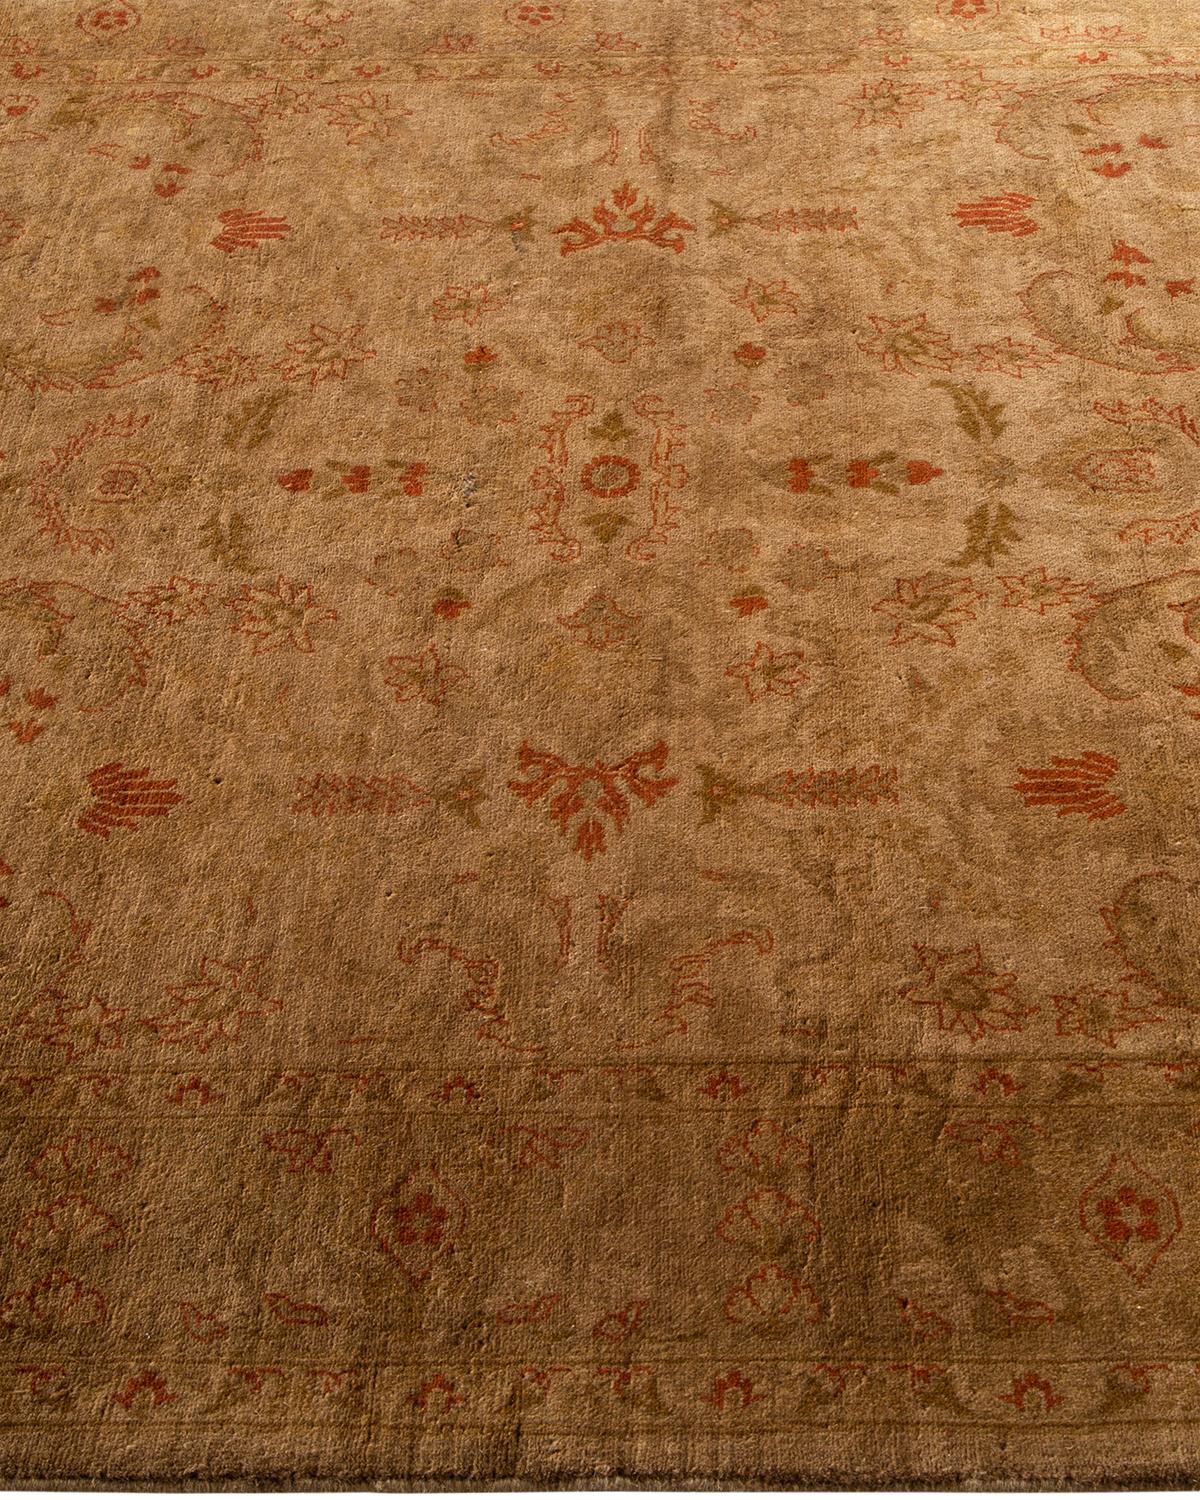 Contemporary Overdyed Hand Knotted Wool Gold Area Rug In New Condition For Sale In Norwalk, CT